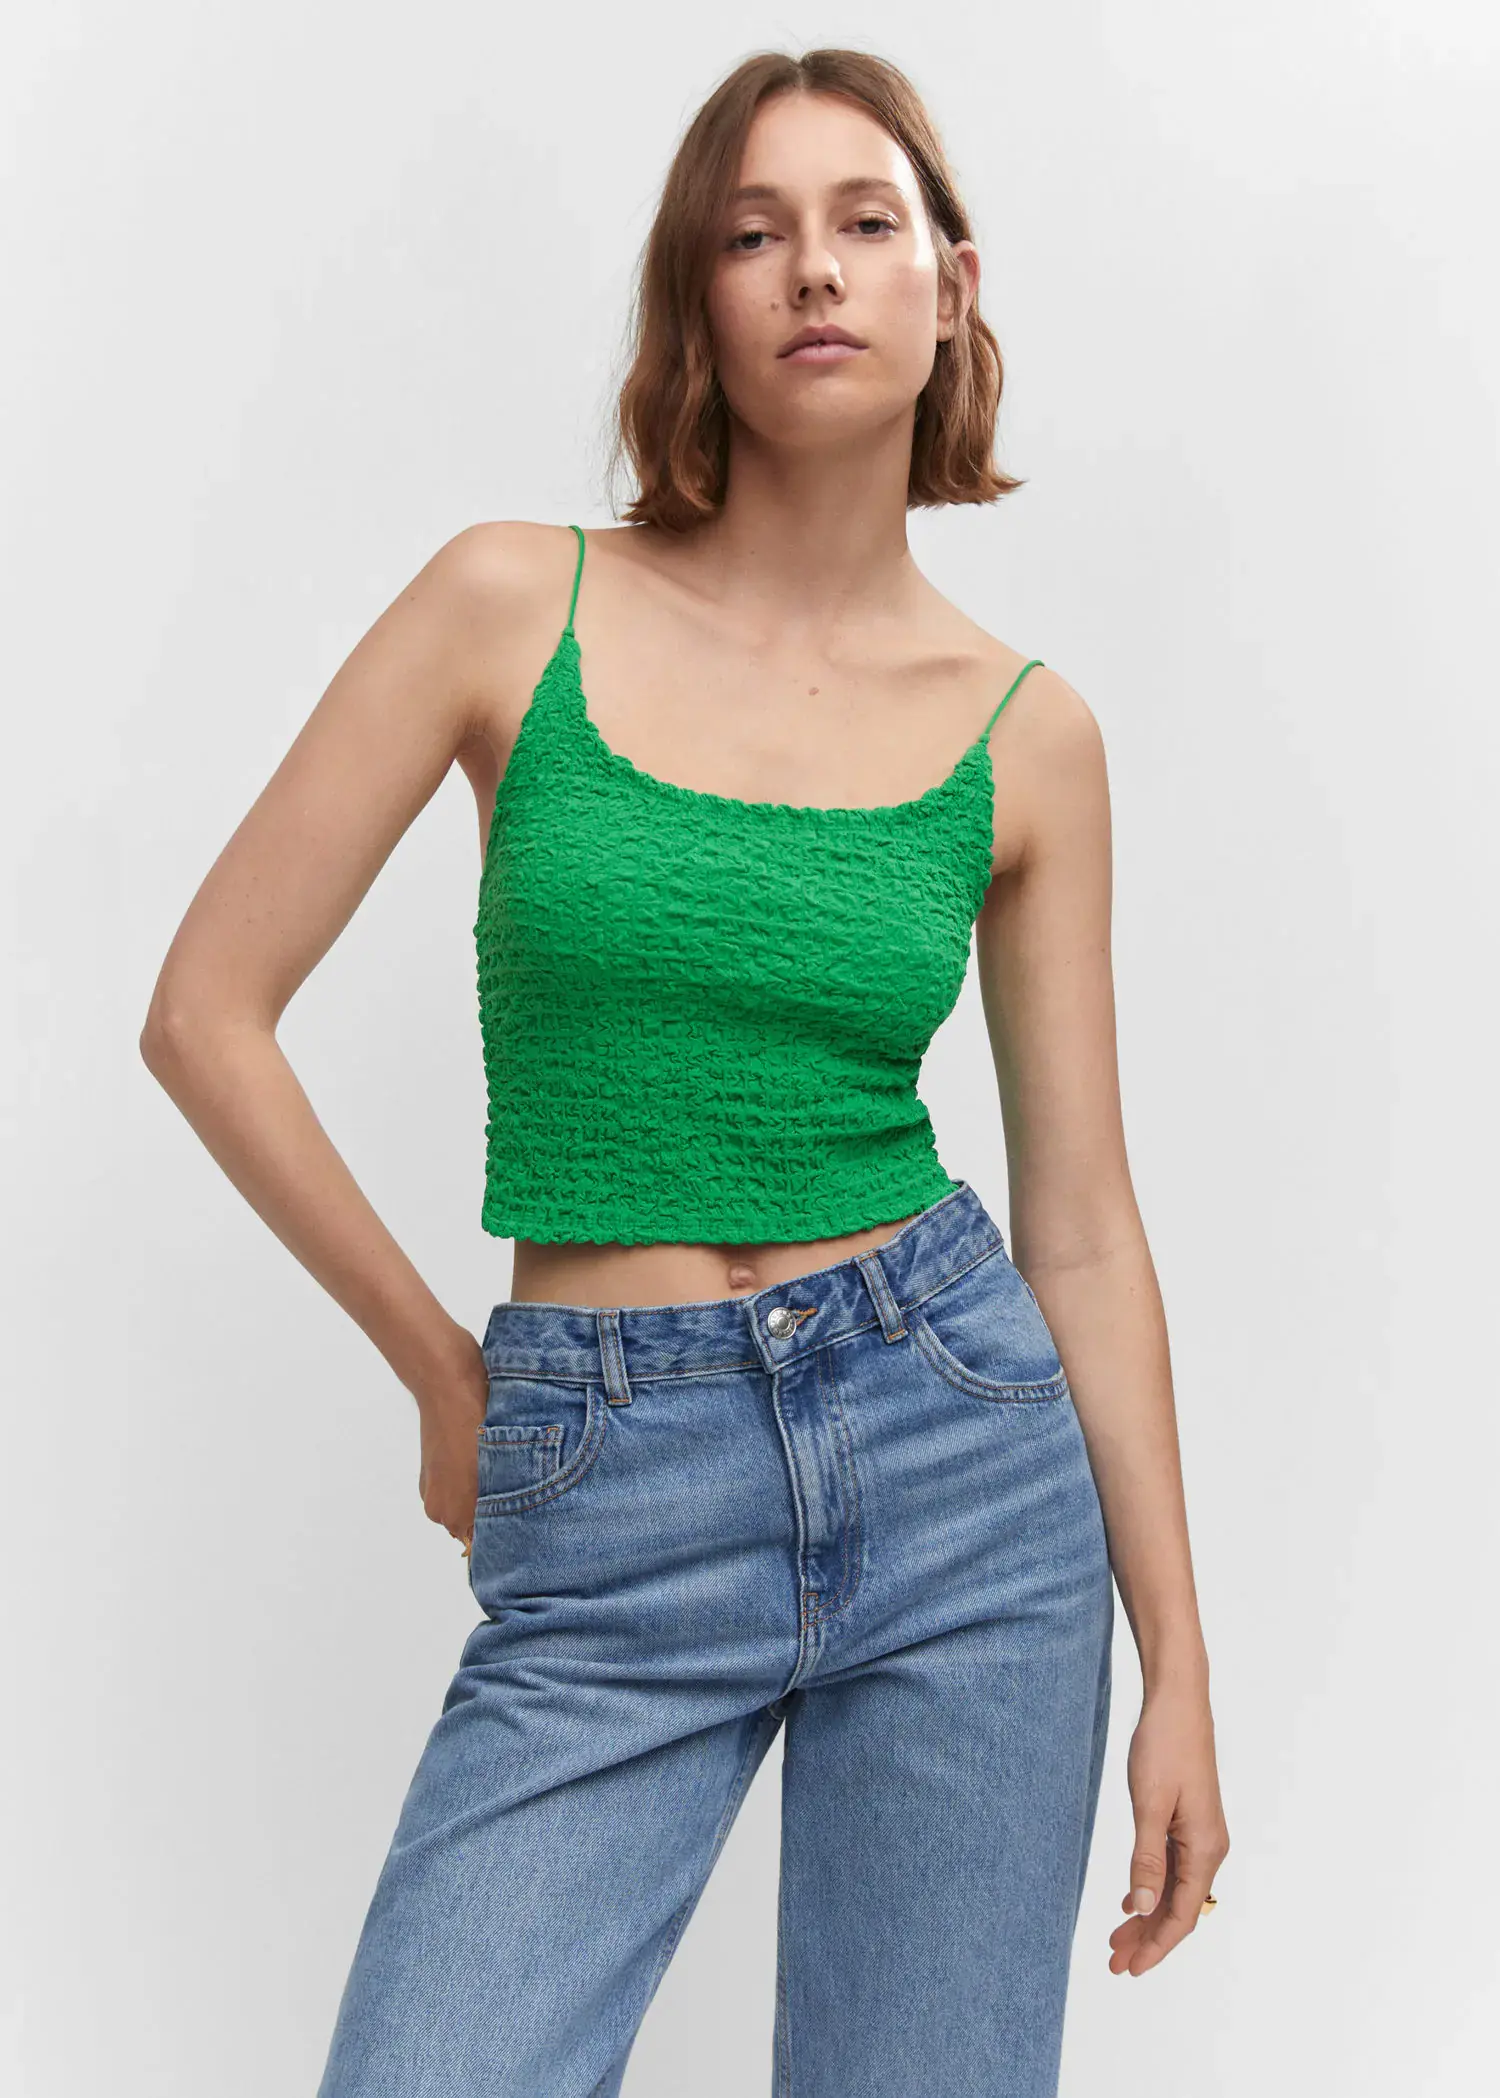 Mango Textured crop top. a woman wearing a green top and jeans. 